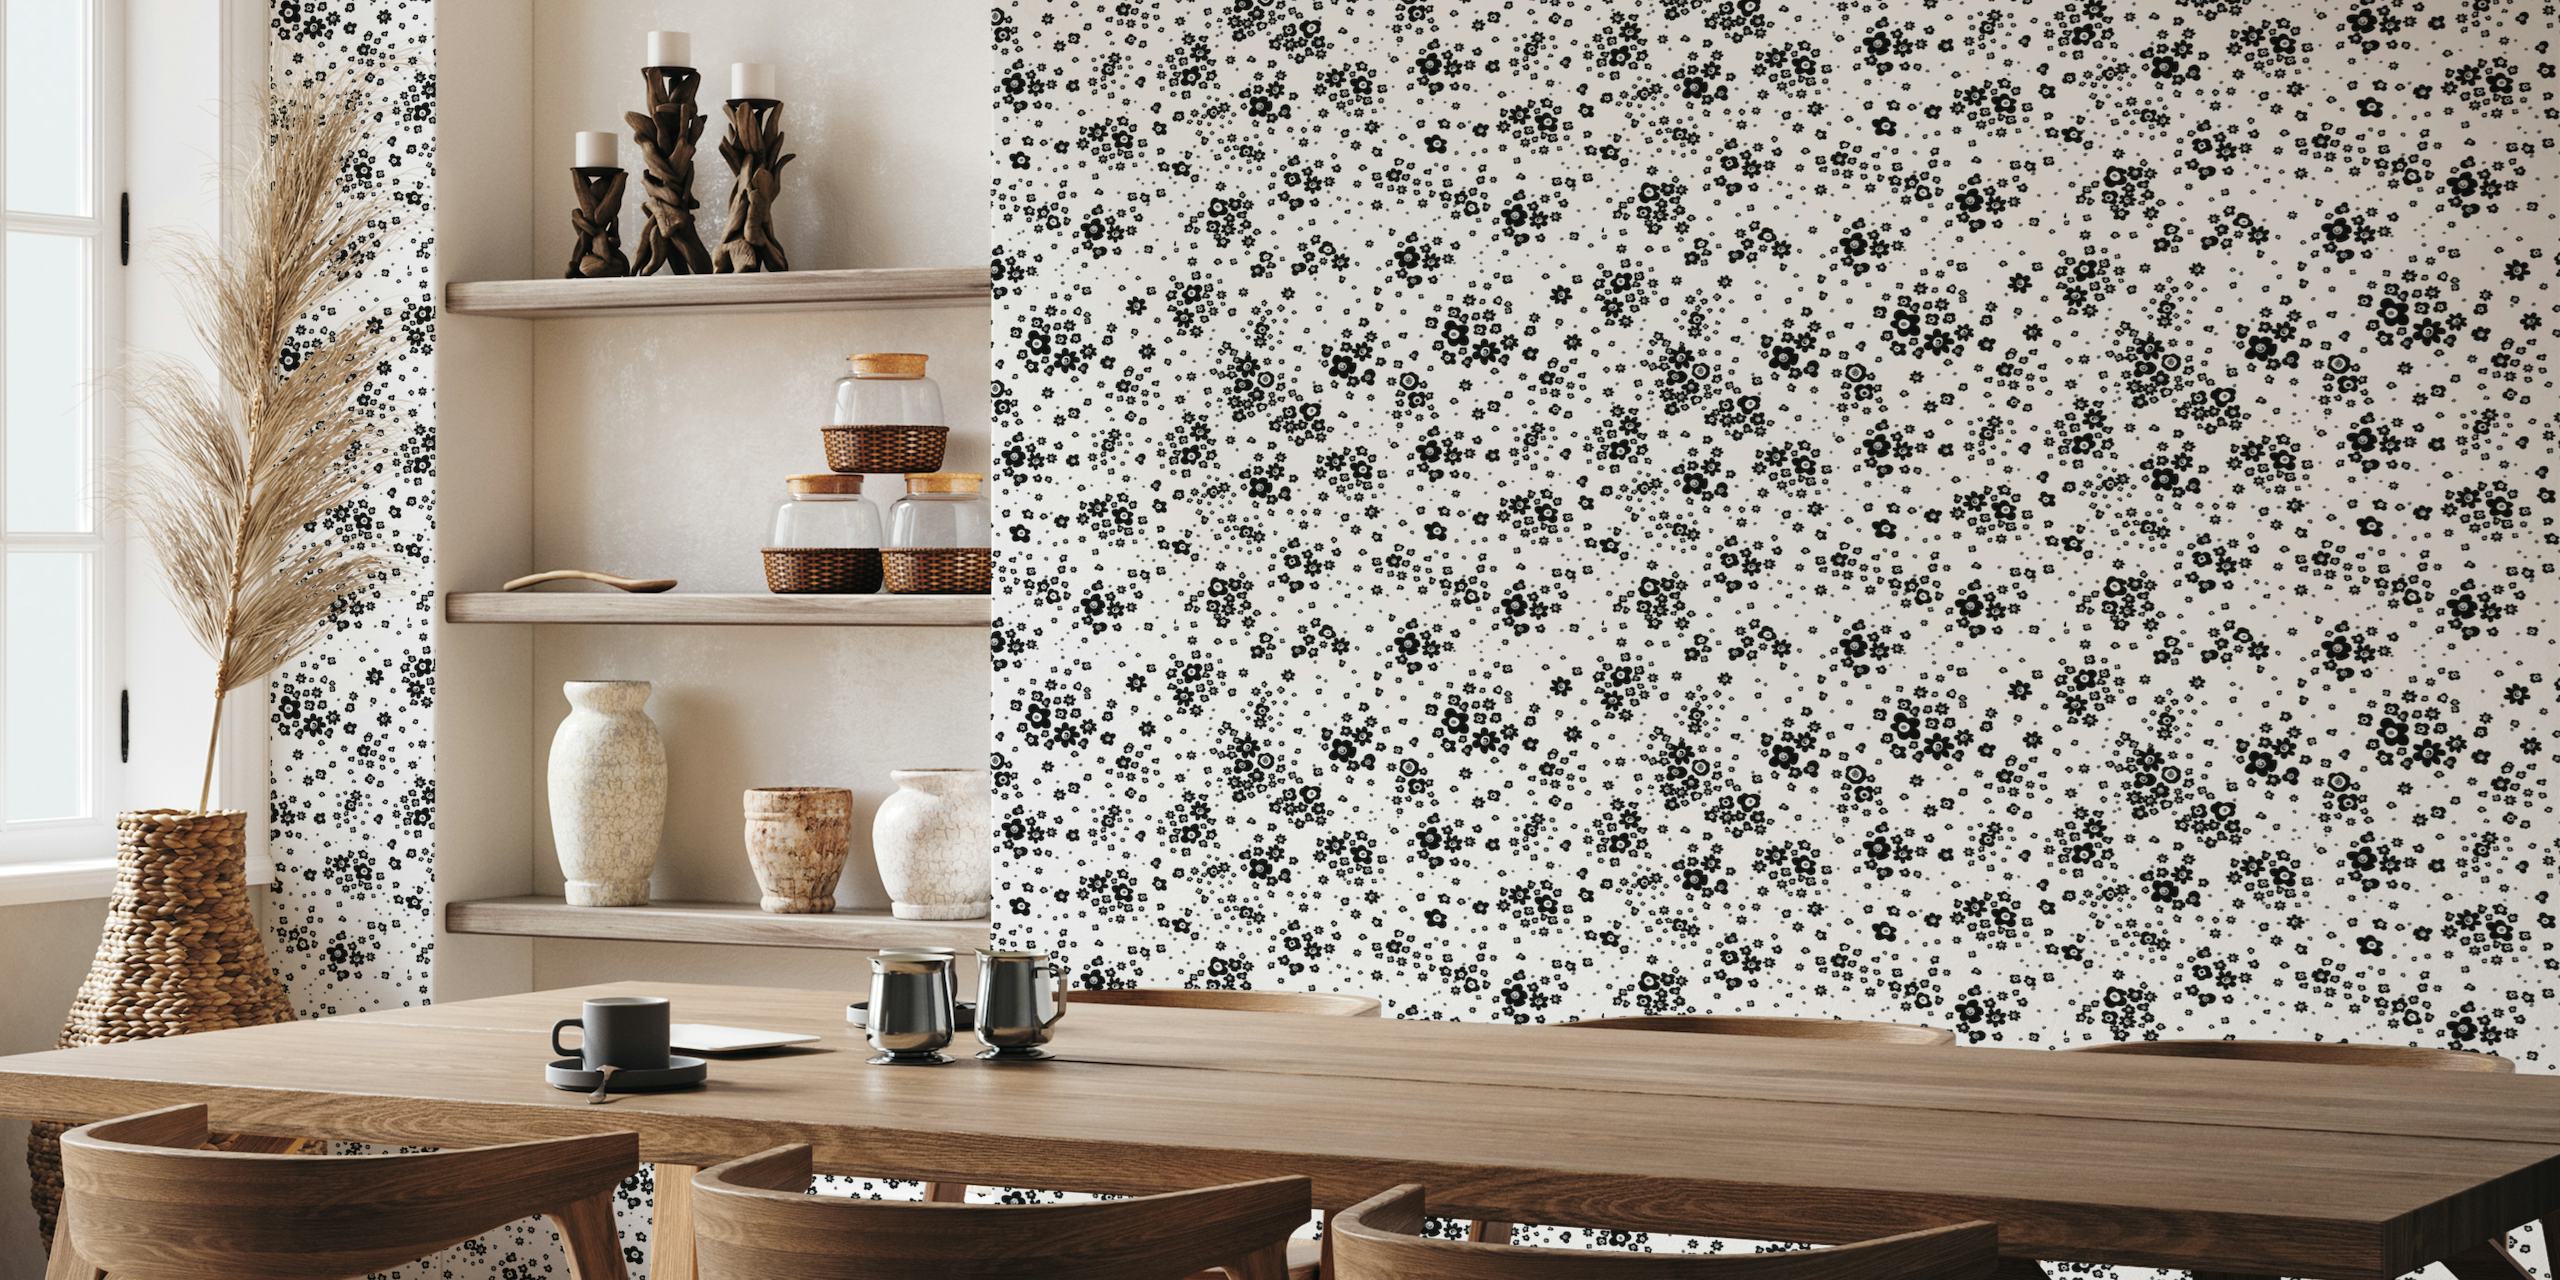 Black and white artistic wild ditsy flowers pattern papel de parede